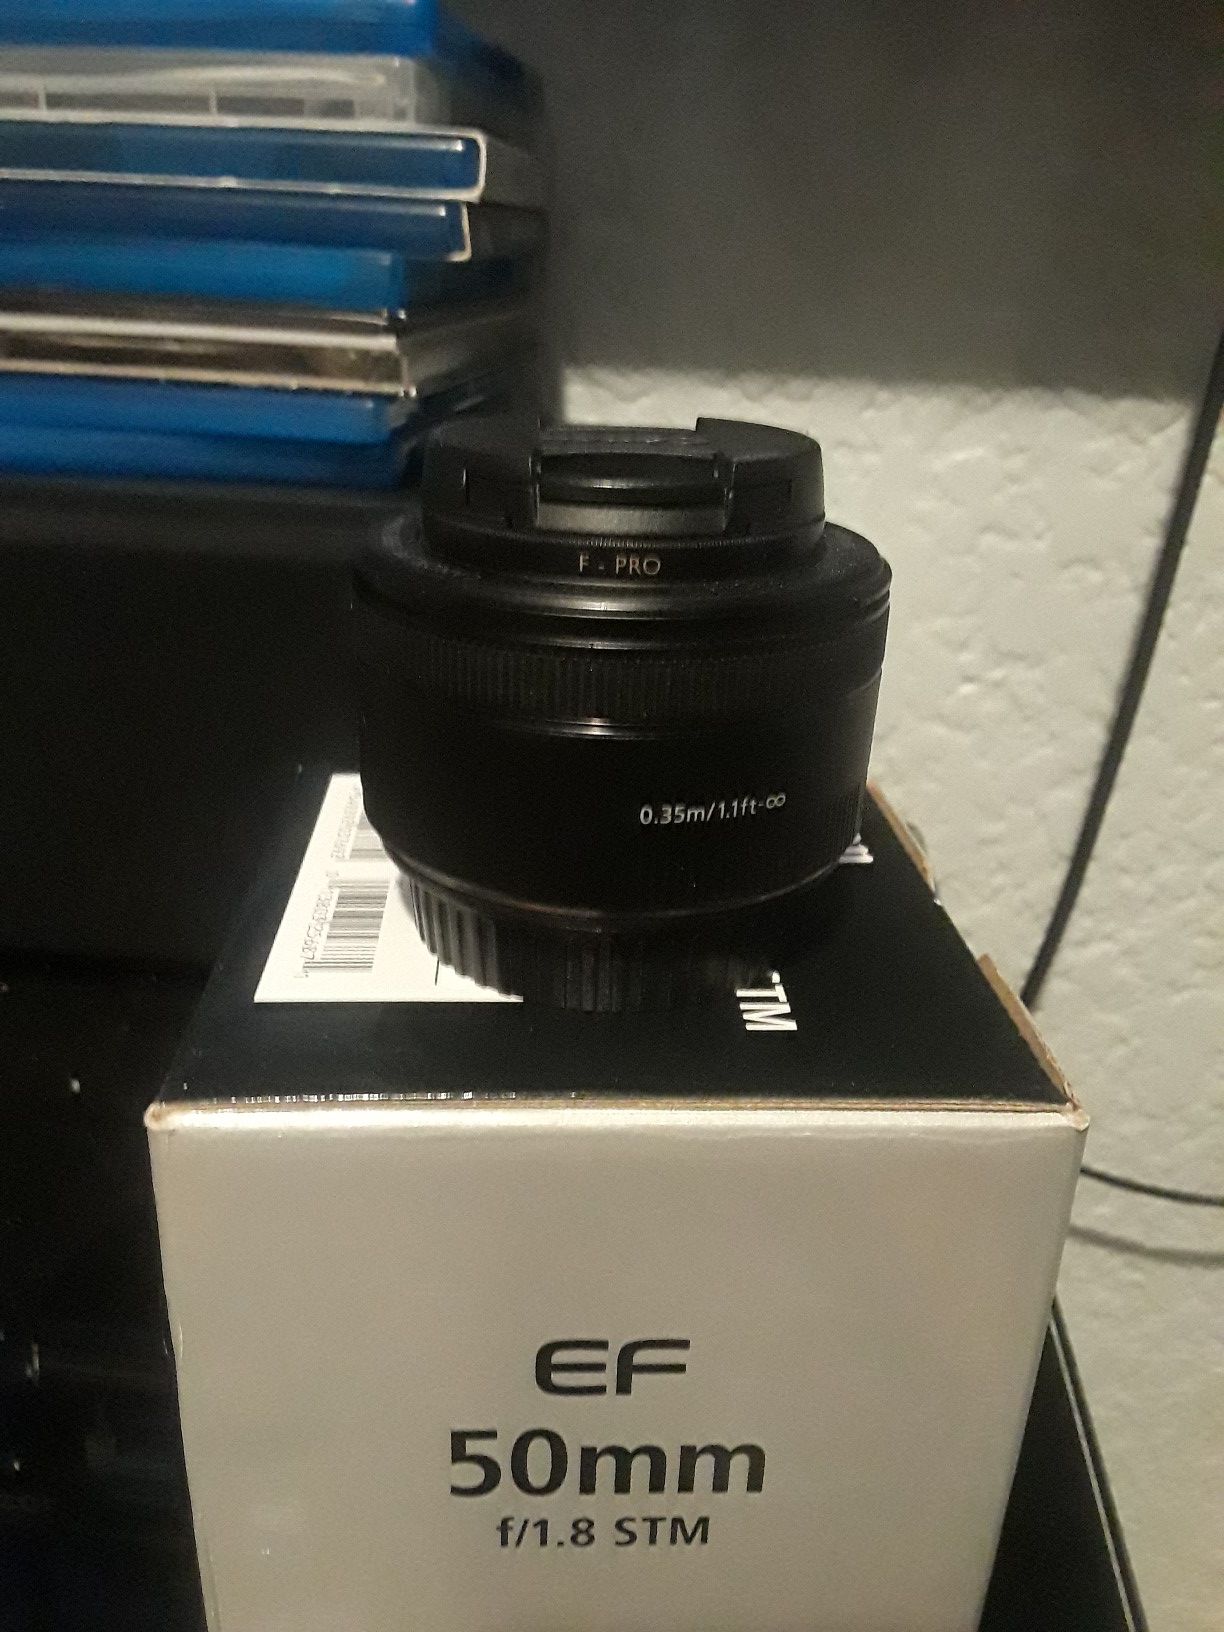 Canon 50mm 1.8 STM Lense "Nifty Fifty"